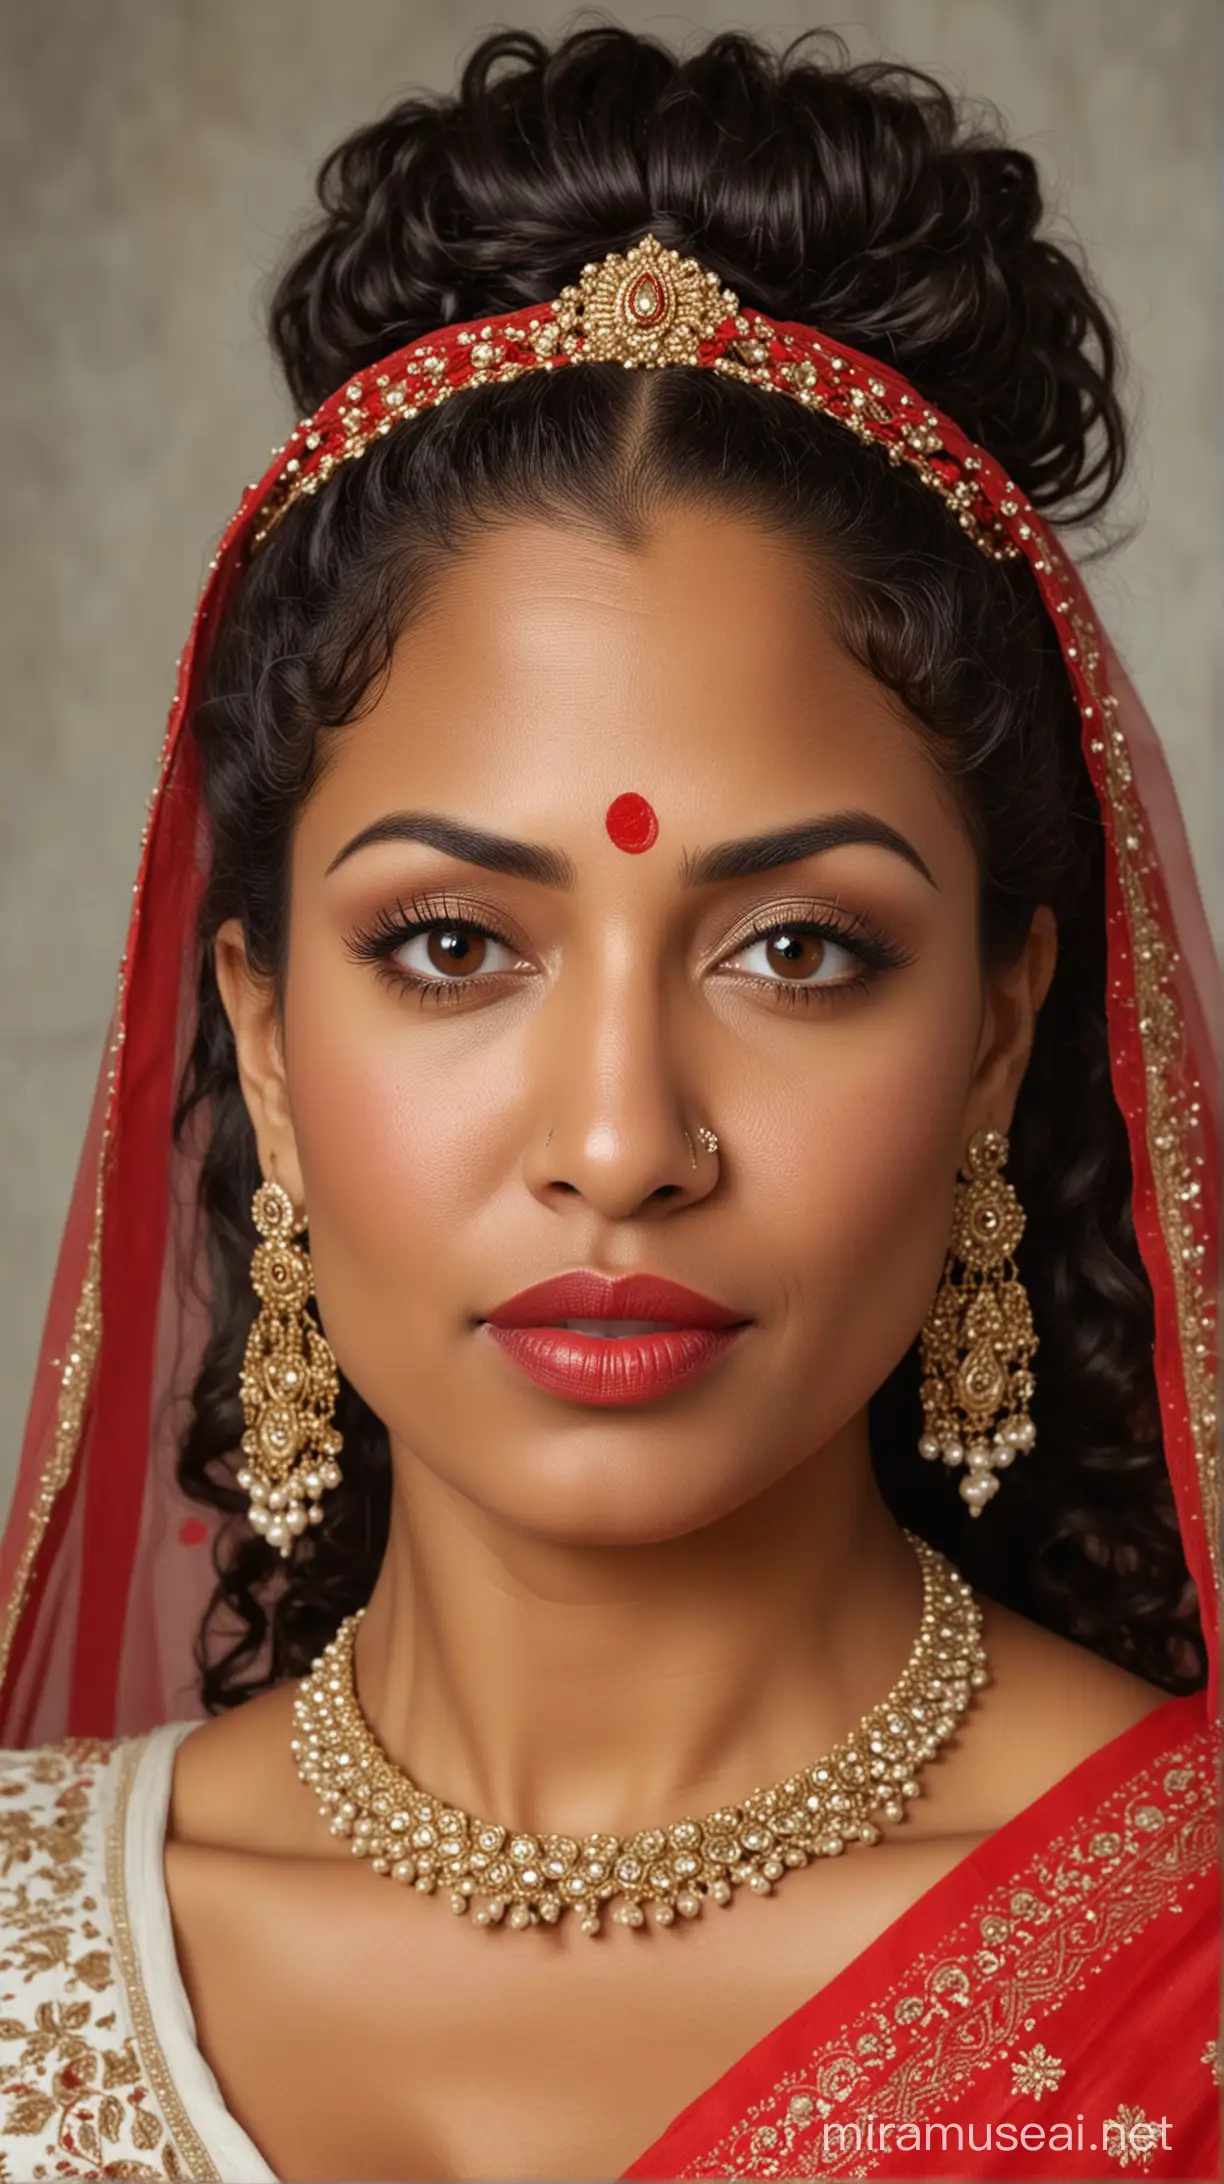 Elegant Black Woman in Indian Bridal Dress with Curly Hair